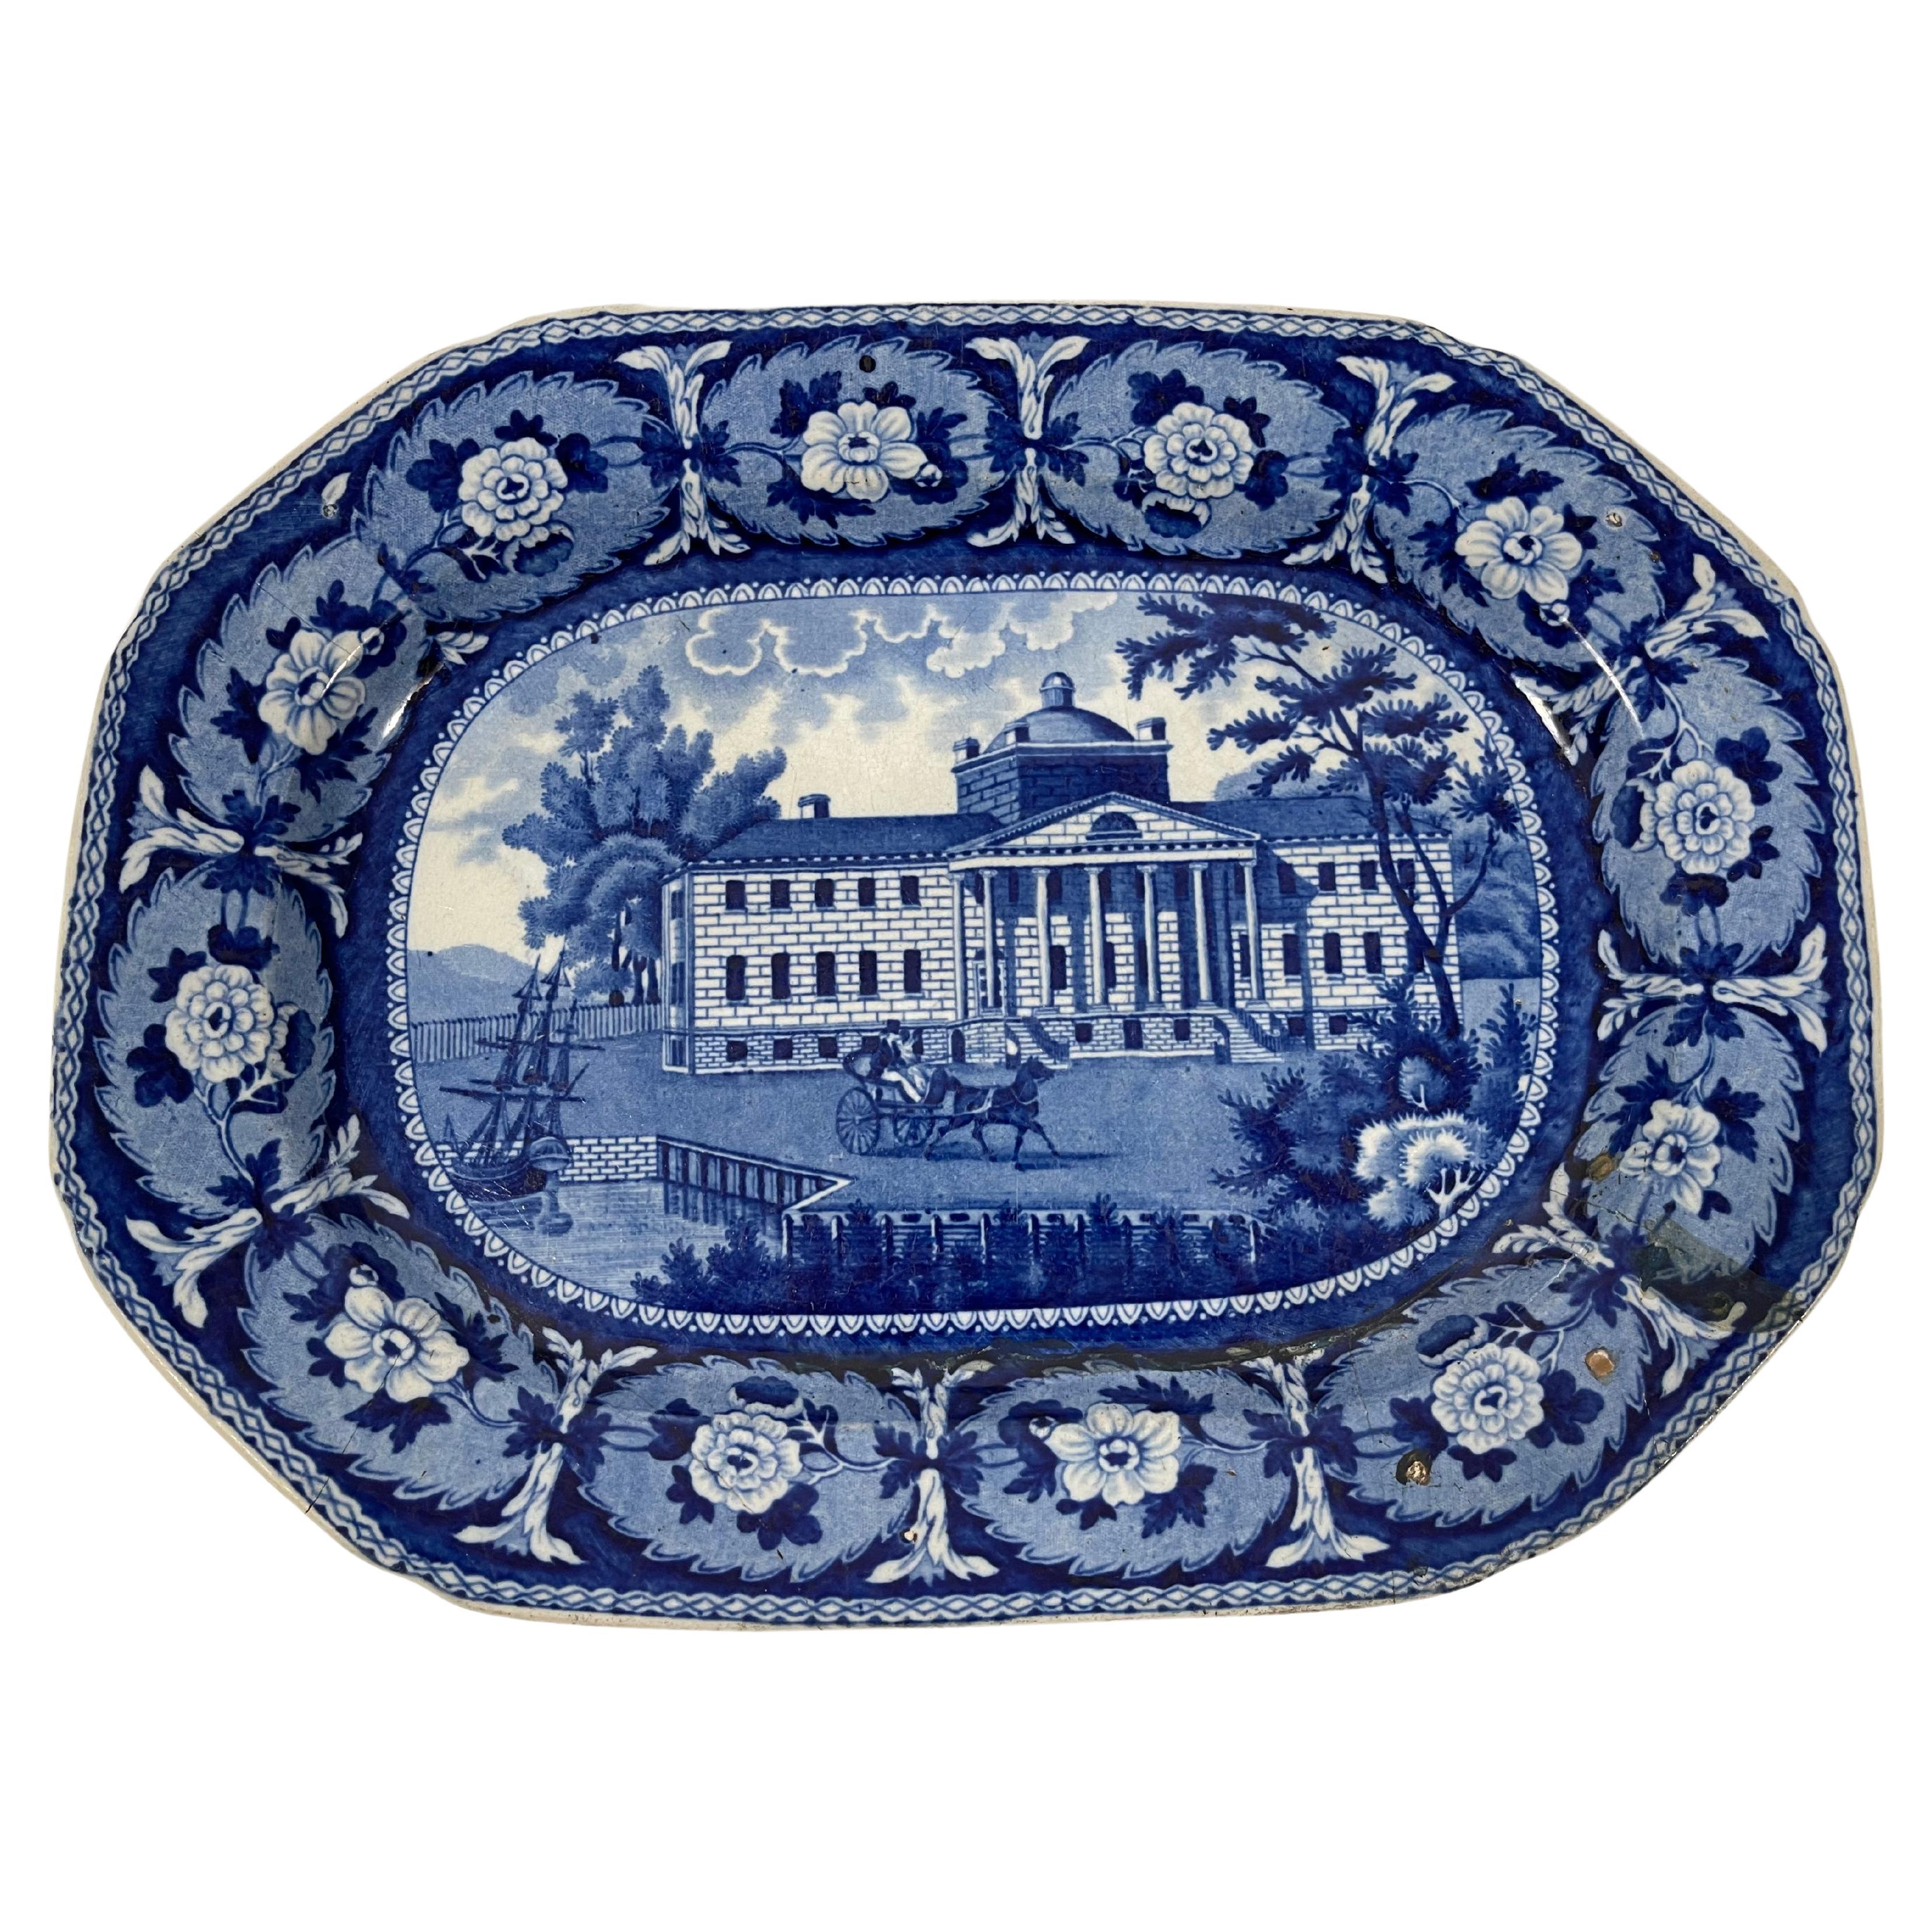 19th Century Blue and White Staffordshire Mass General Hospital Platter